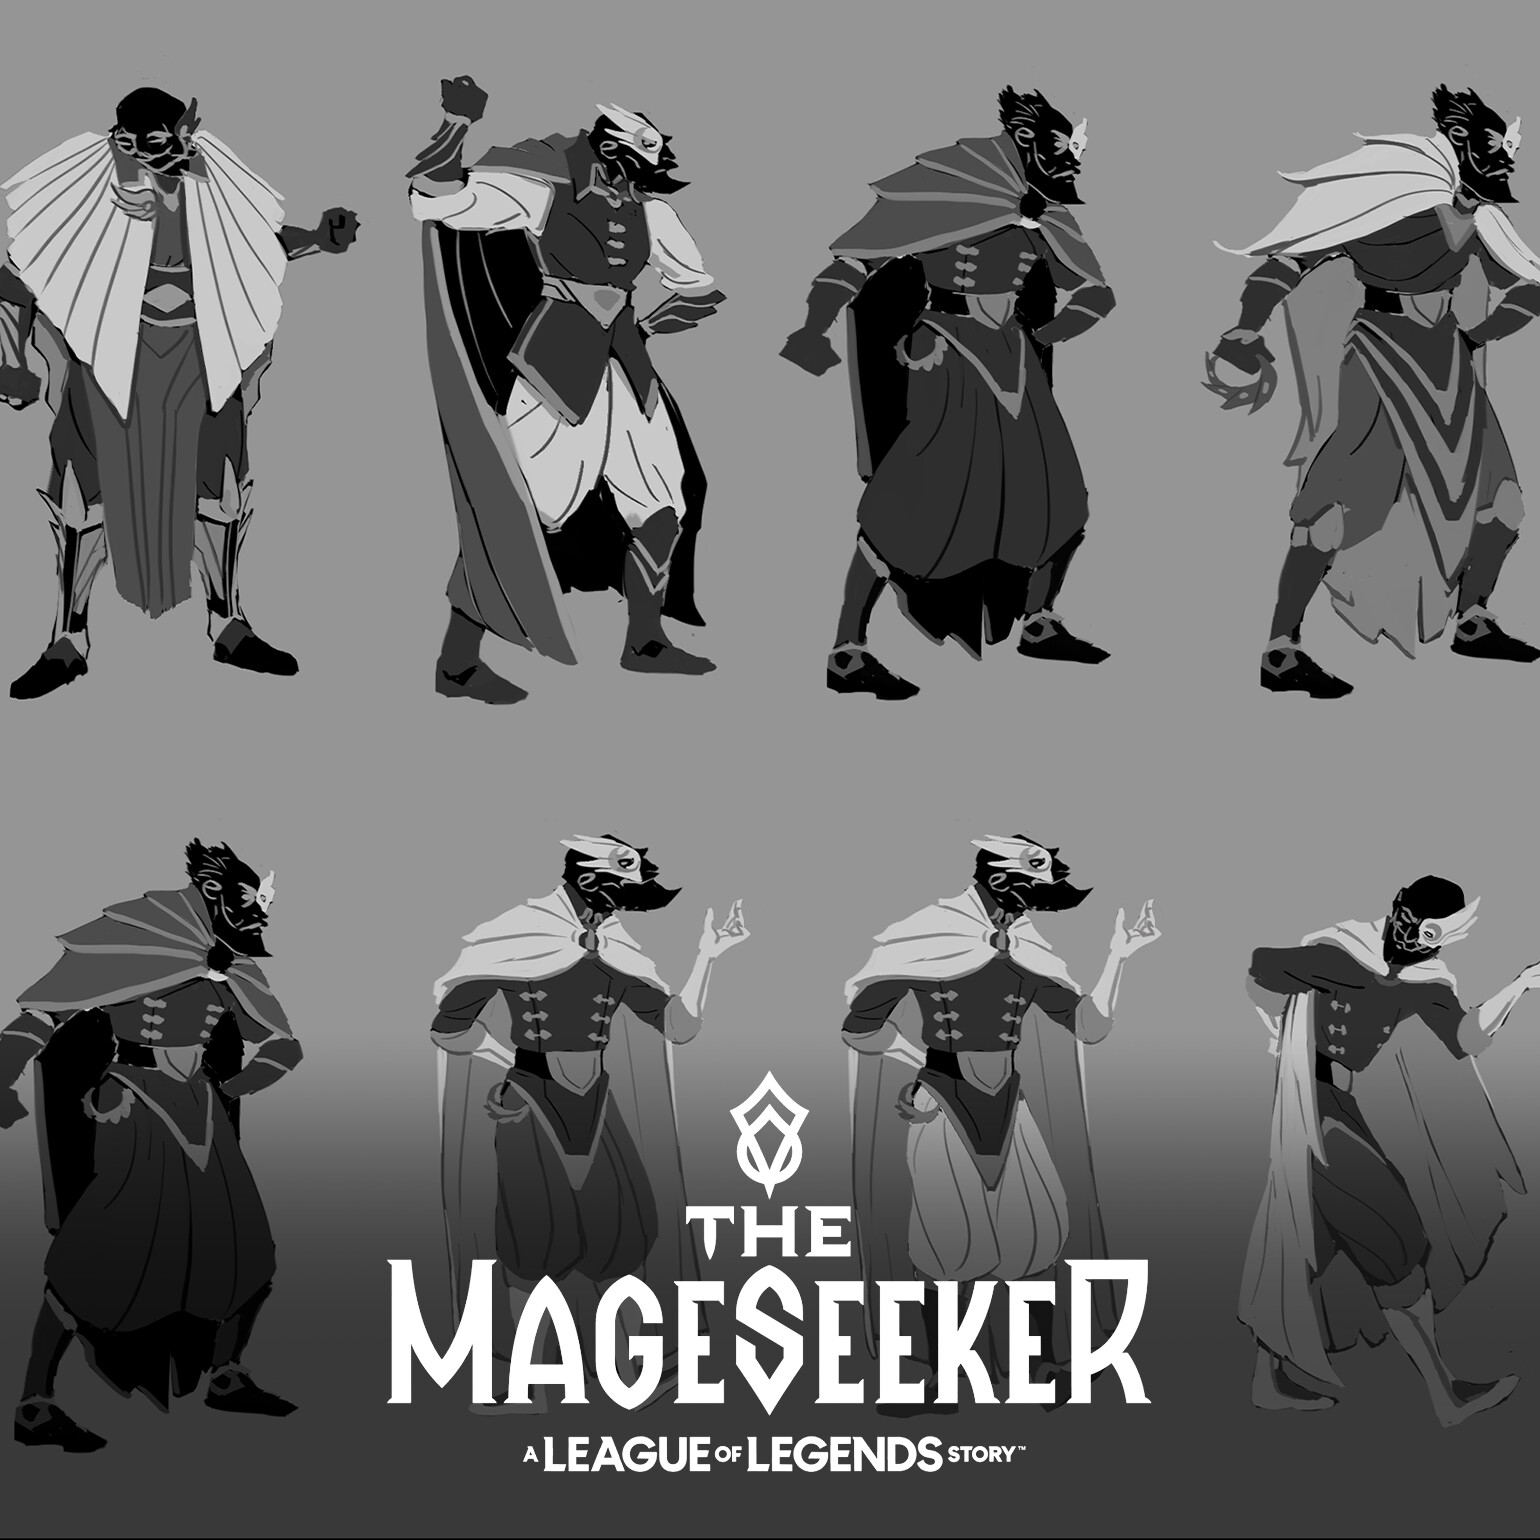 The Mageseeker: A League of Legends Story .V1 by Saif96 on DeviantArt